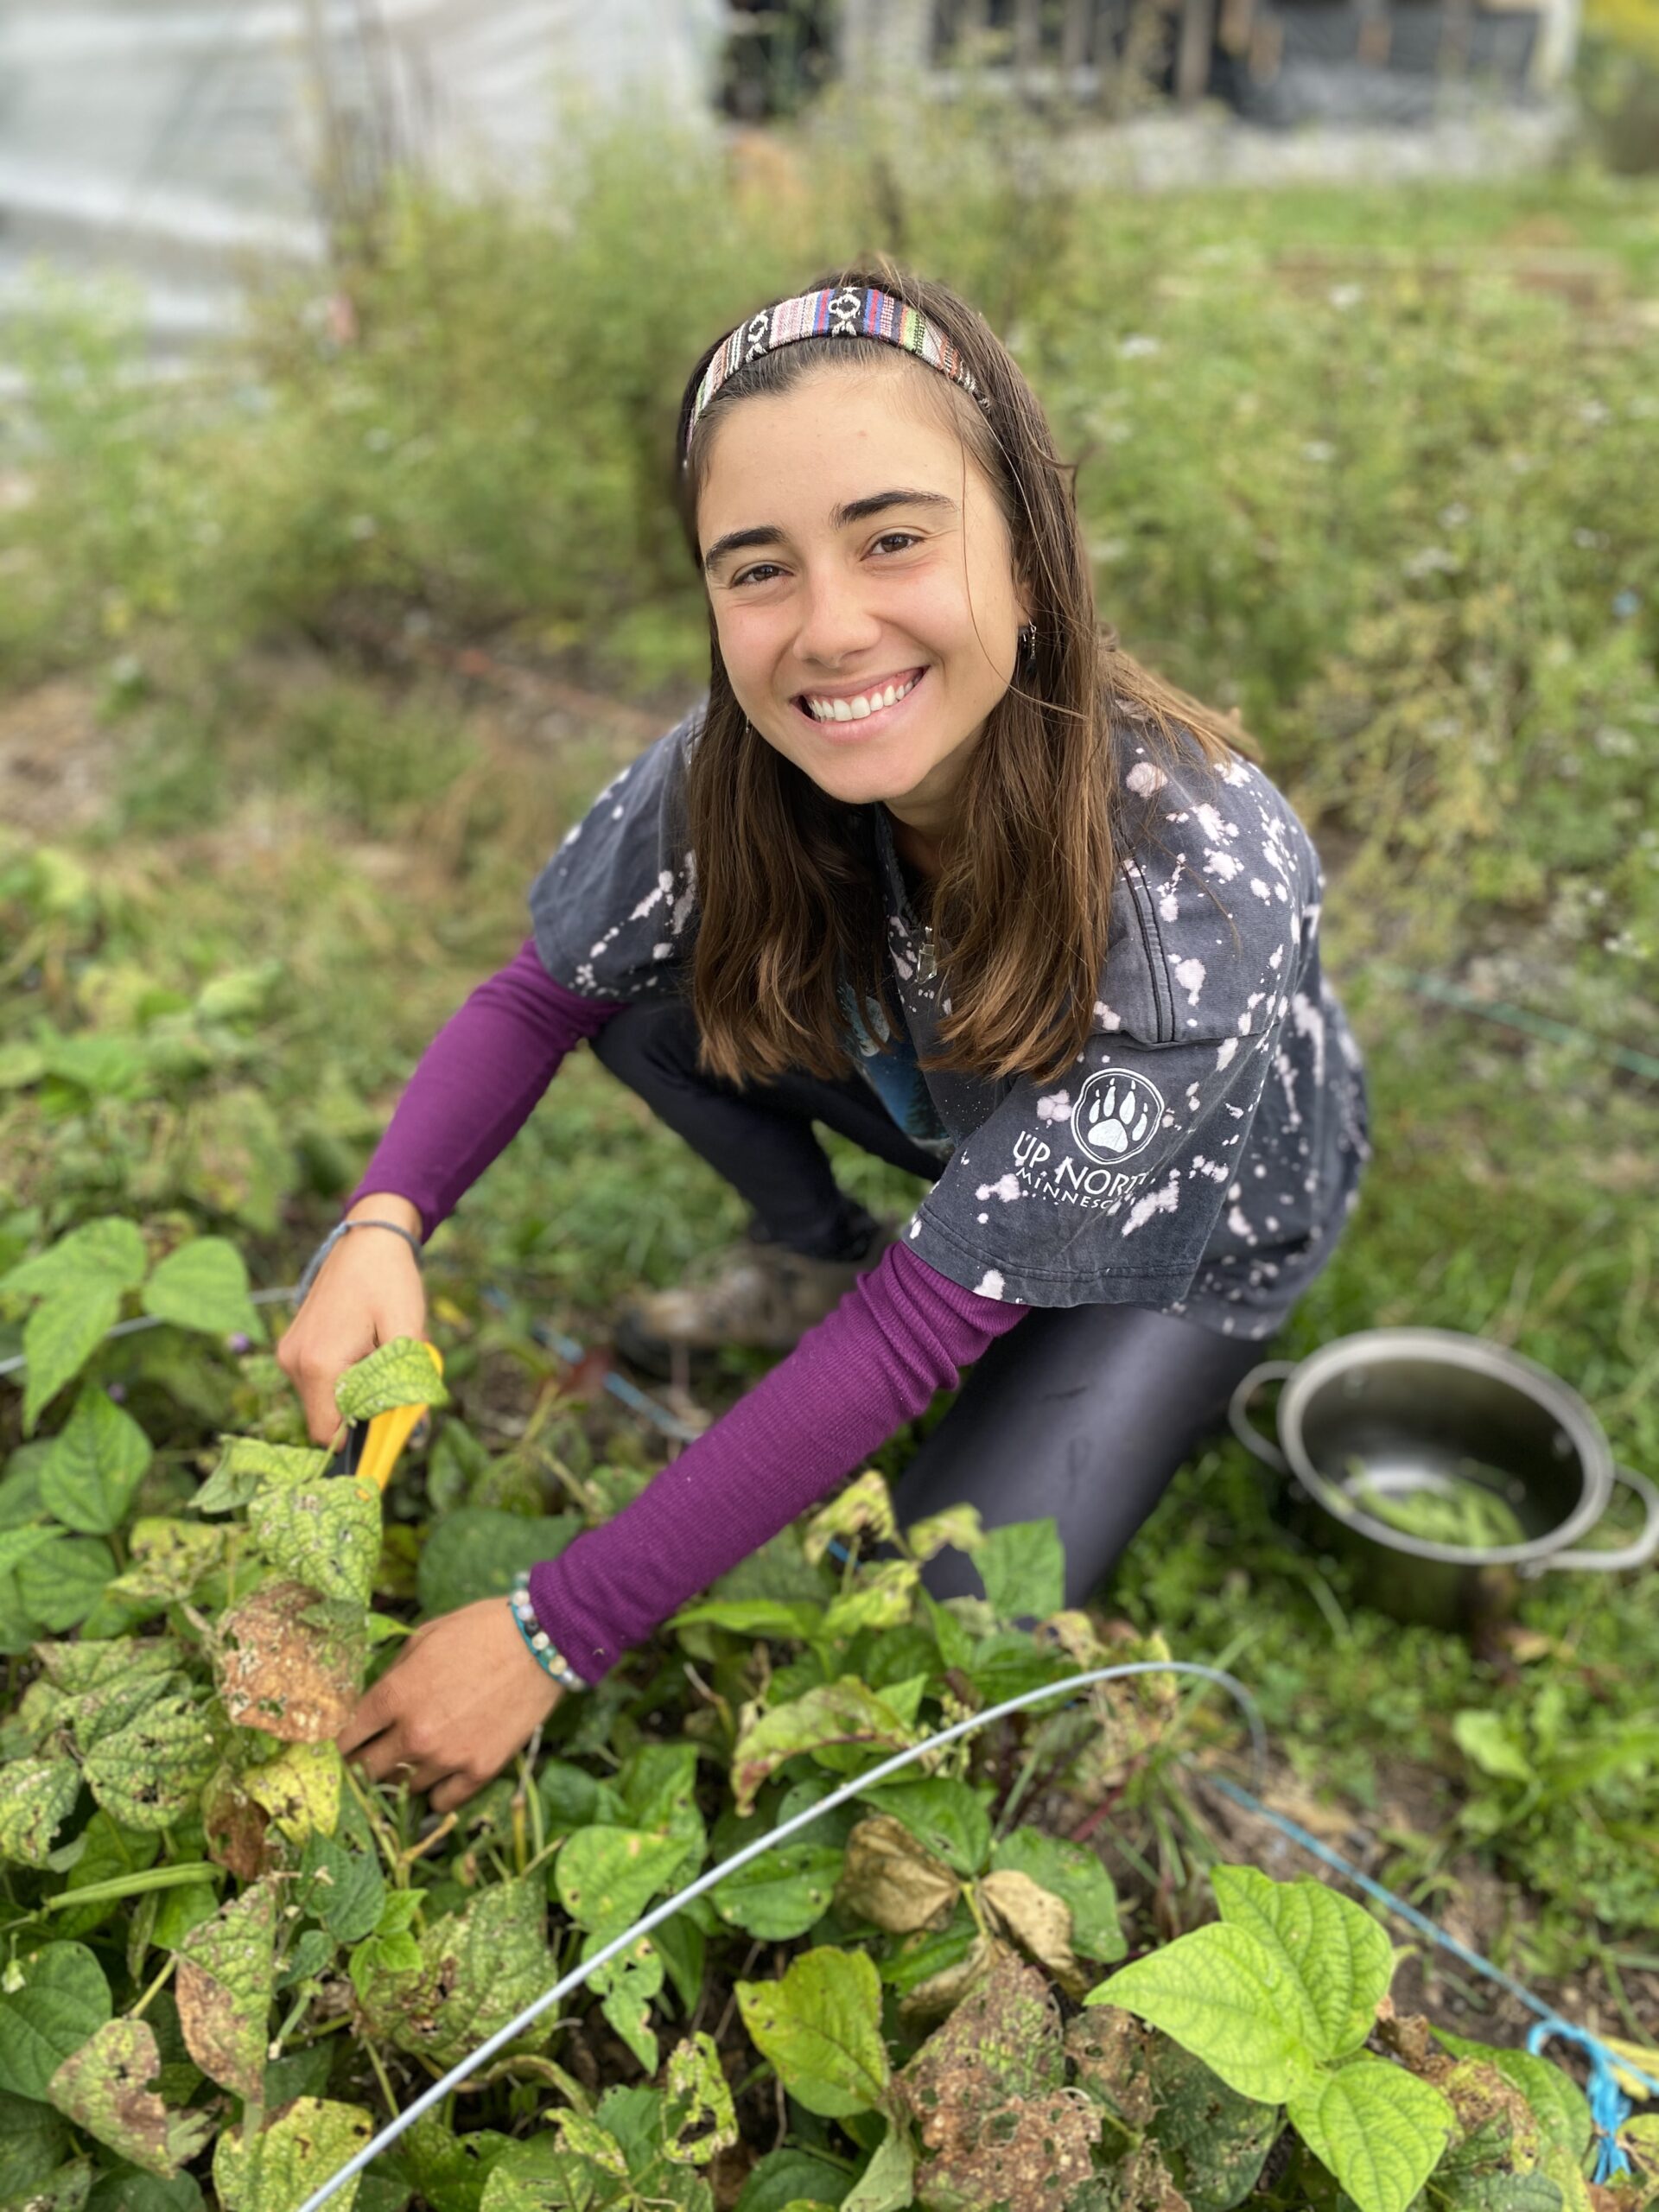 Permaculture intern harvesting beans